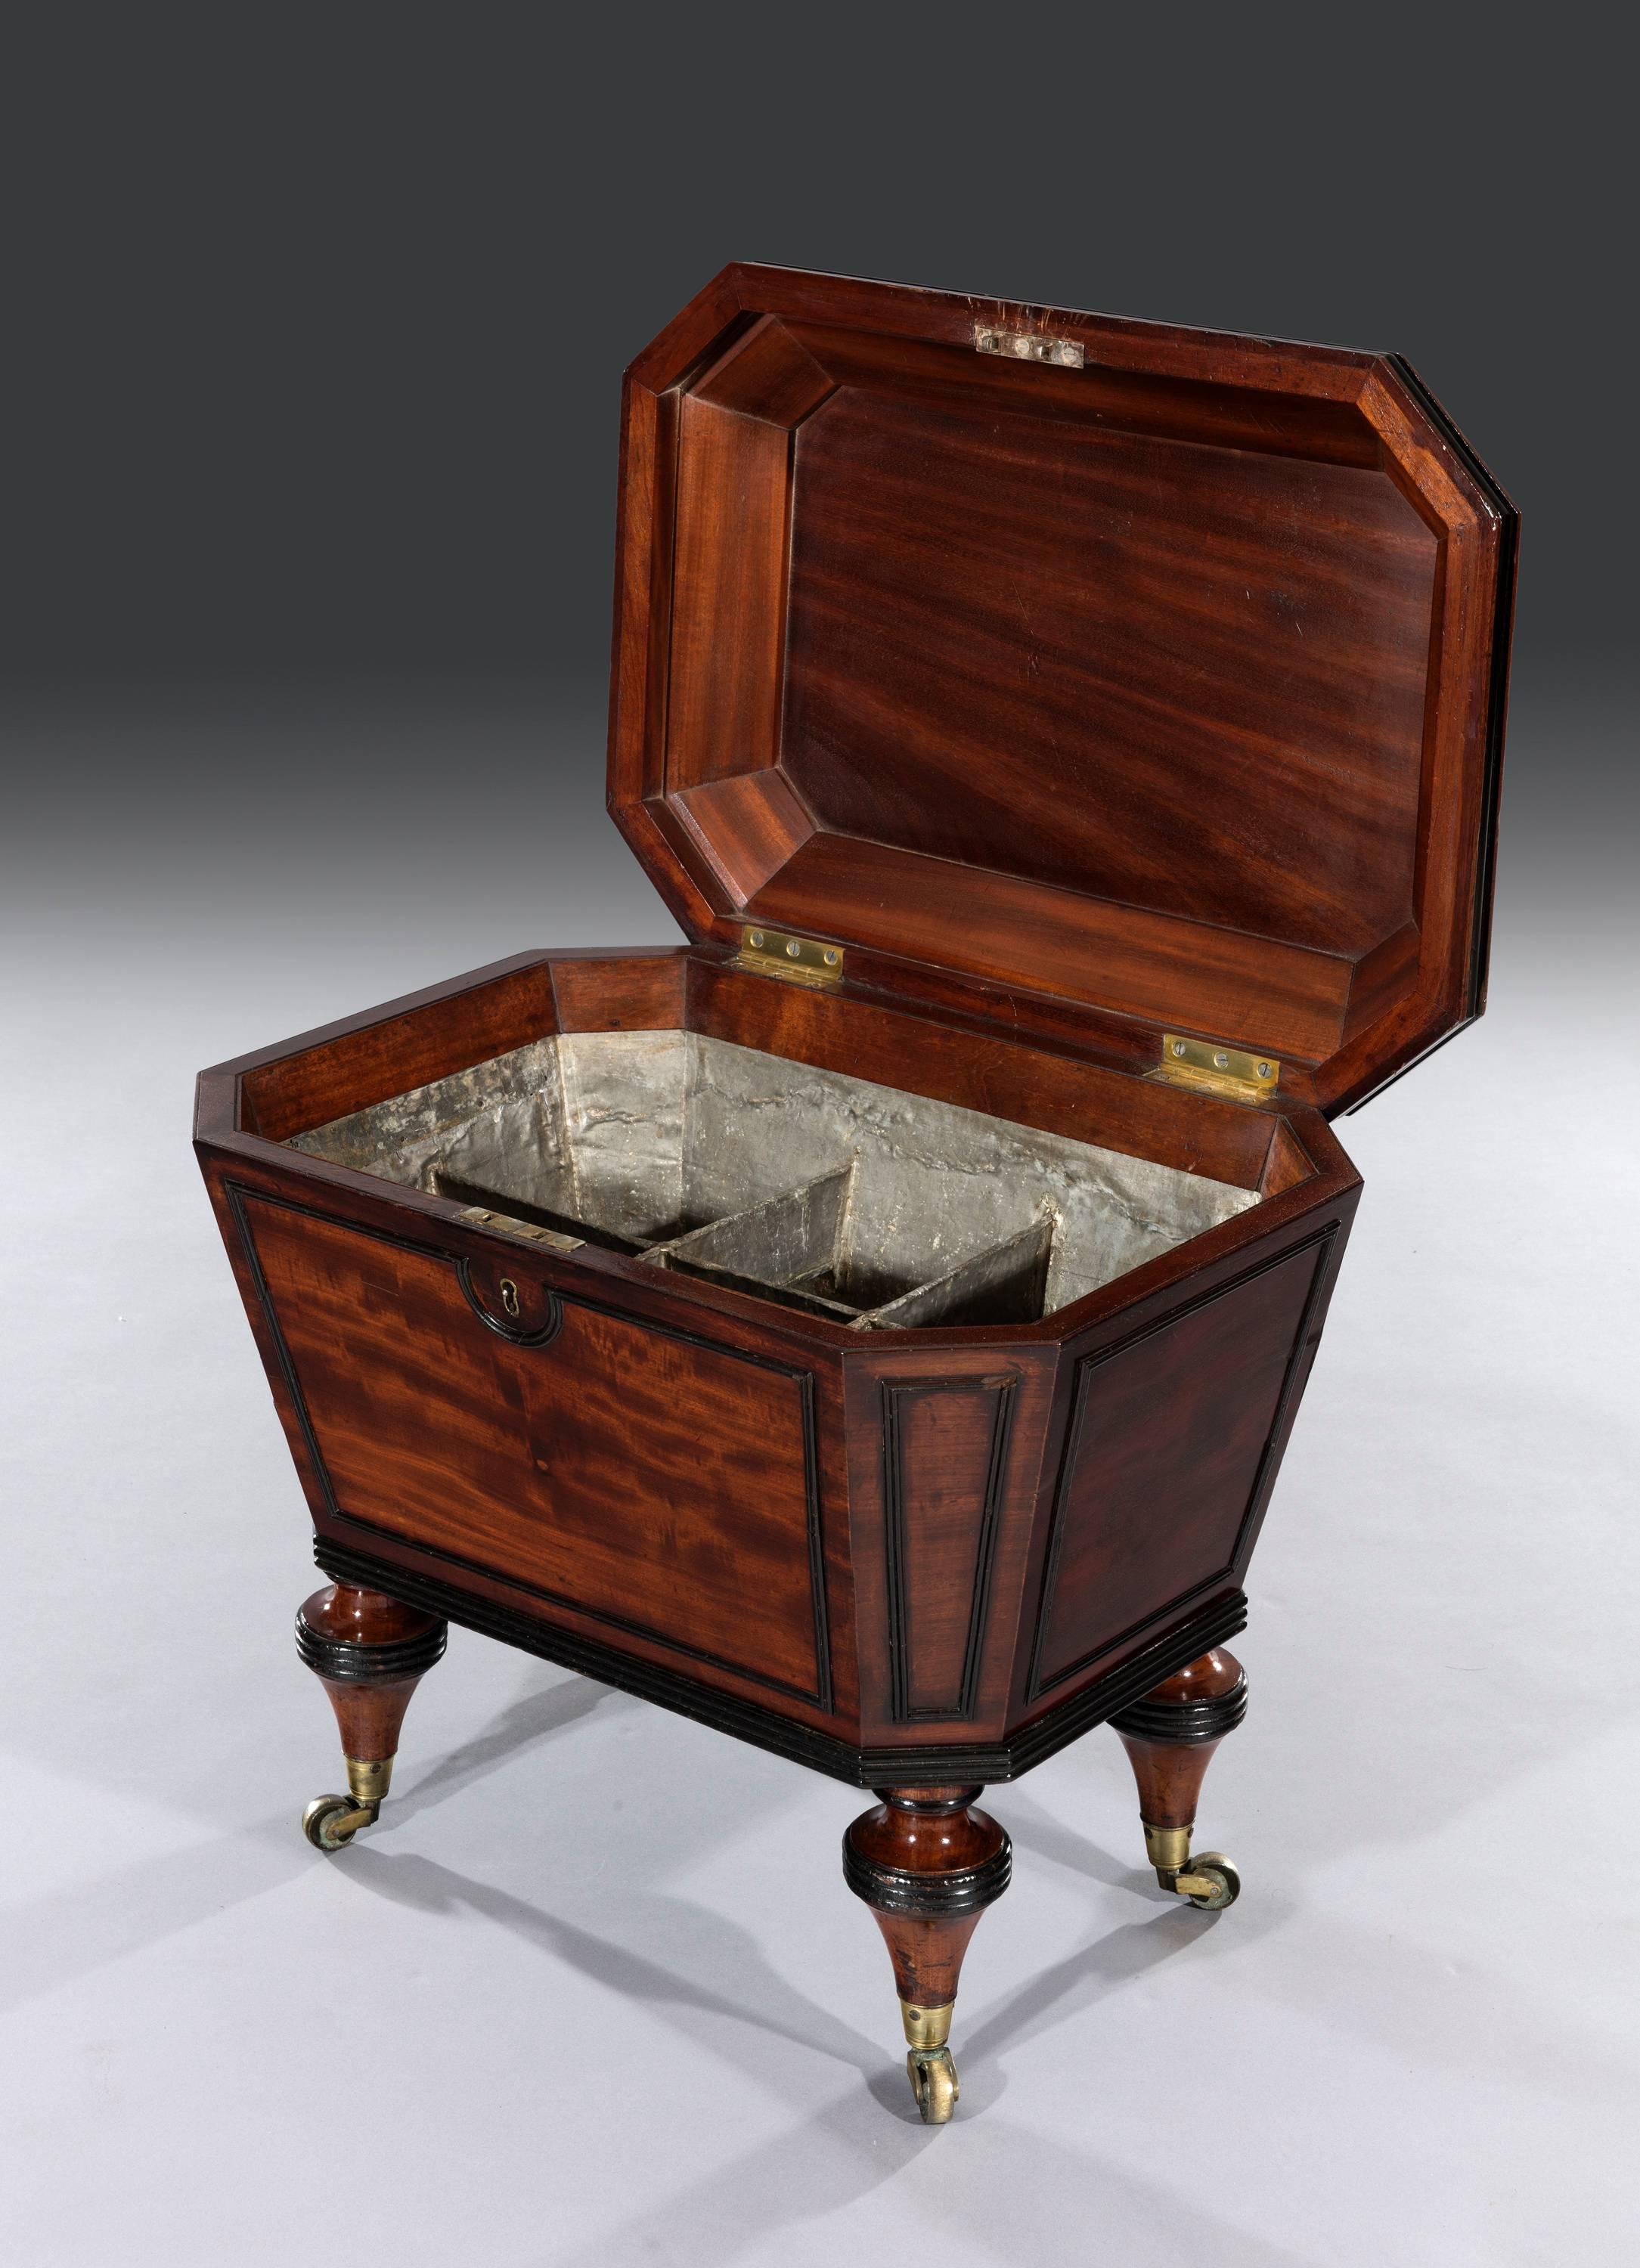 Regency mahogany wine cooler cellaret with ebony beeding turned tapered legs and lead lined compartments.
Measures: 24